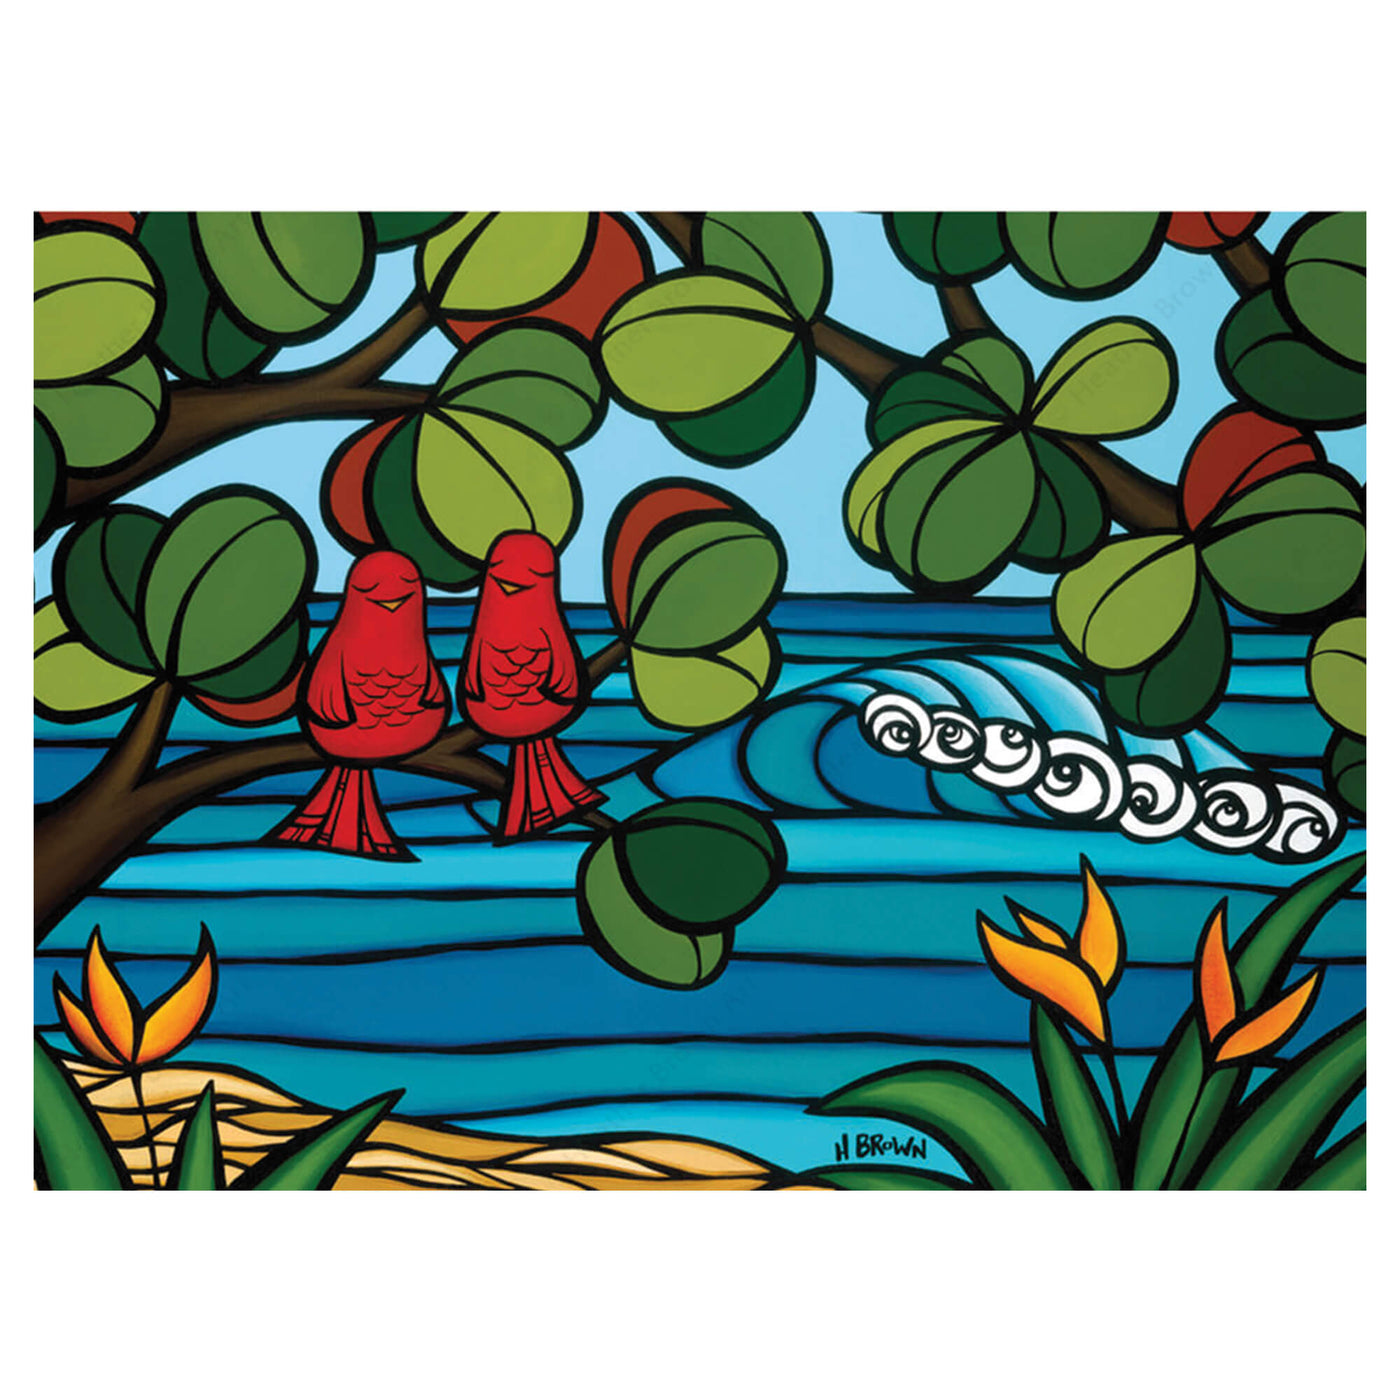 A greeting card featuring two red birds on the tree by Hawaii surf artist Heather Brown